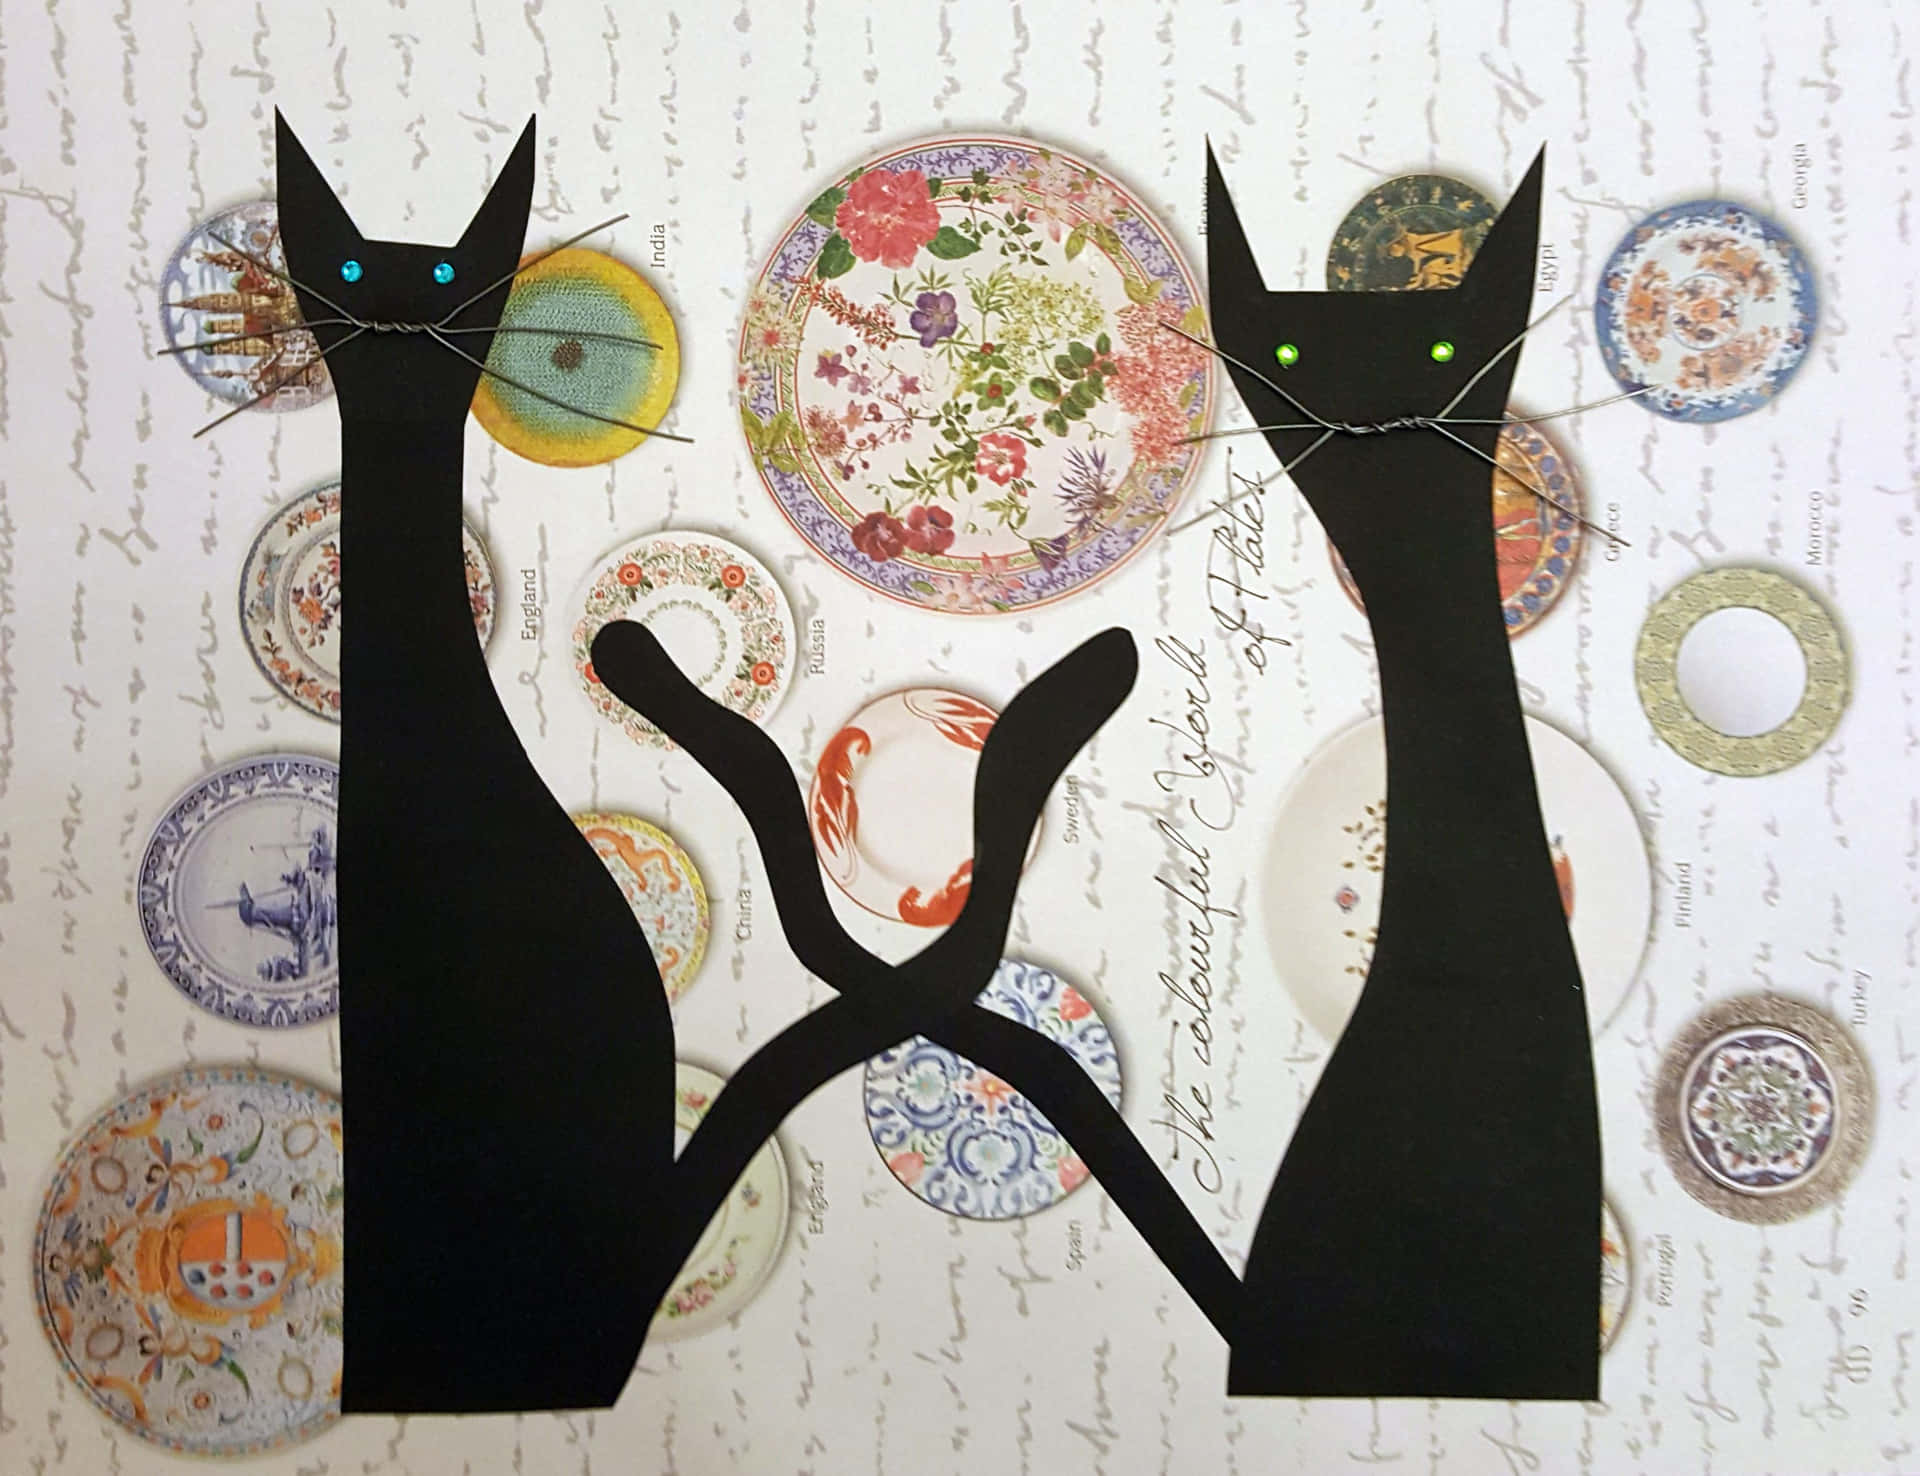 Two Black Cats Standing On Plates